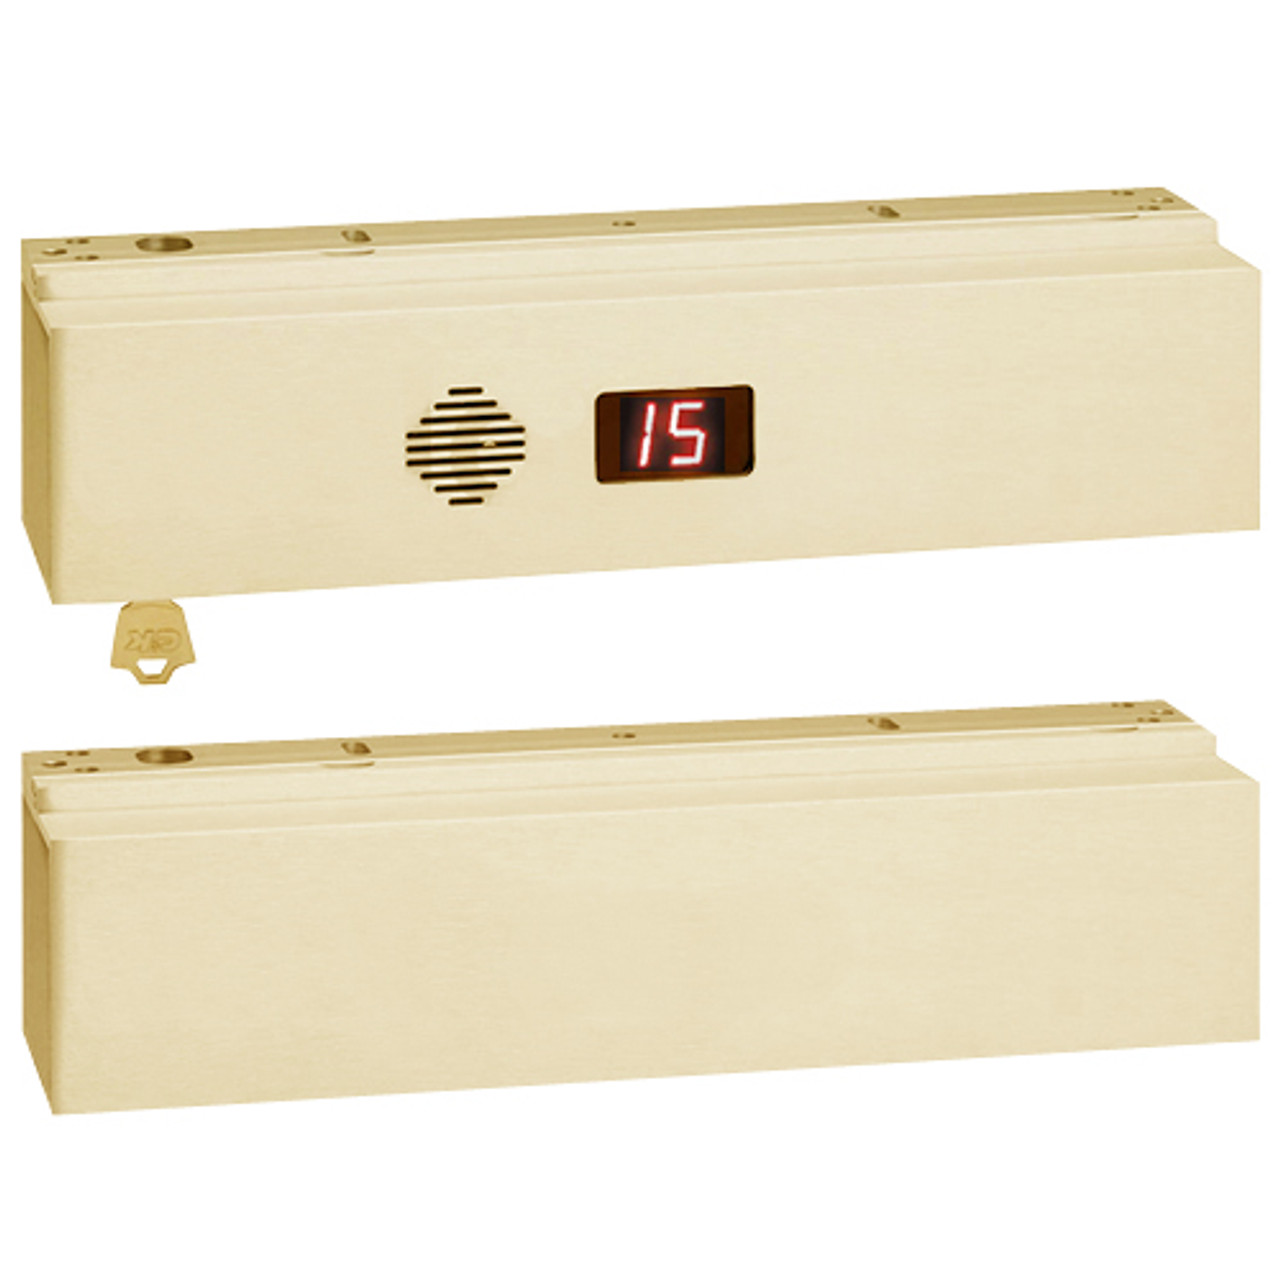 1511T-ND-K-C-D2B2A2 SDC 1511T Series Tandem Integrated Delayed Egress Locks with Door Position Status and Magnetic Bond Sensor in Brass Powder